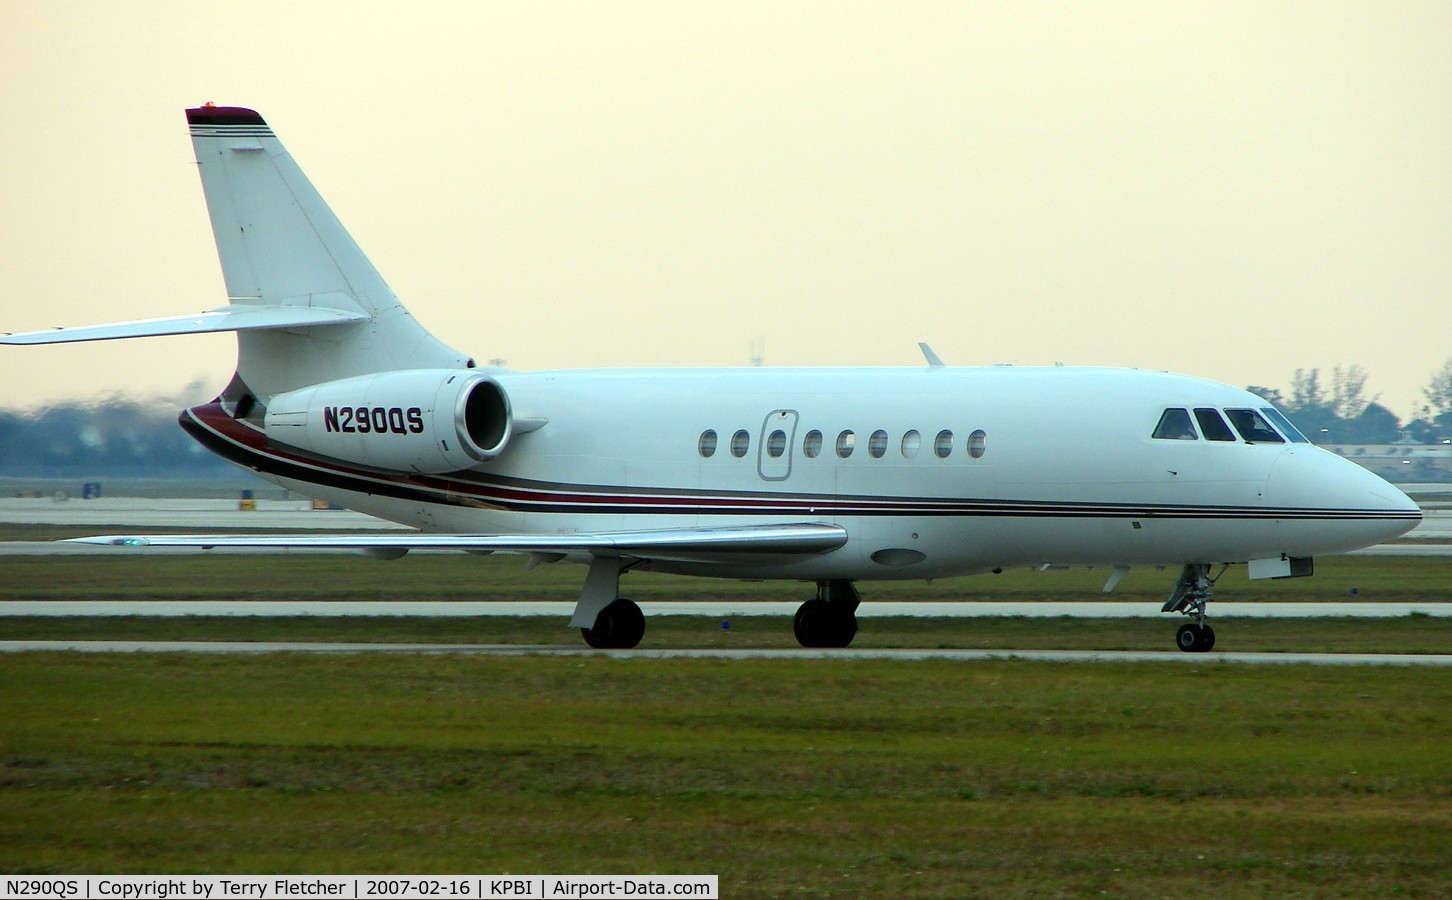 N290QS, 2002 Dassault Falcon 2000 C/N 190, part of the Friday afternoon arrivals 'rush' at PBI